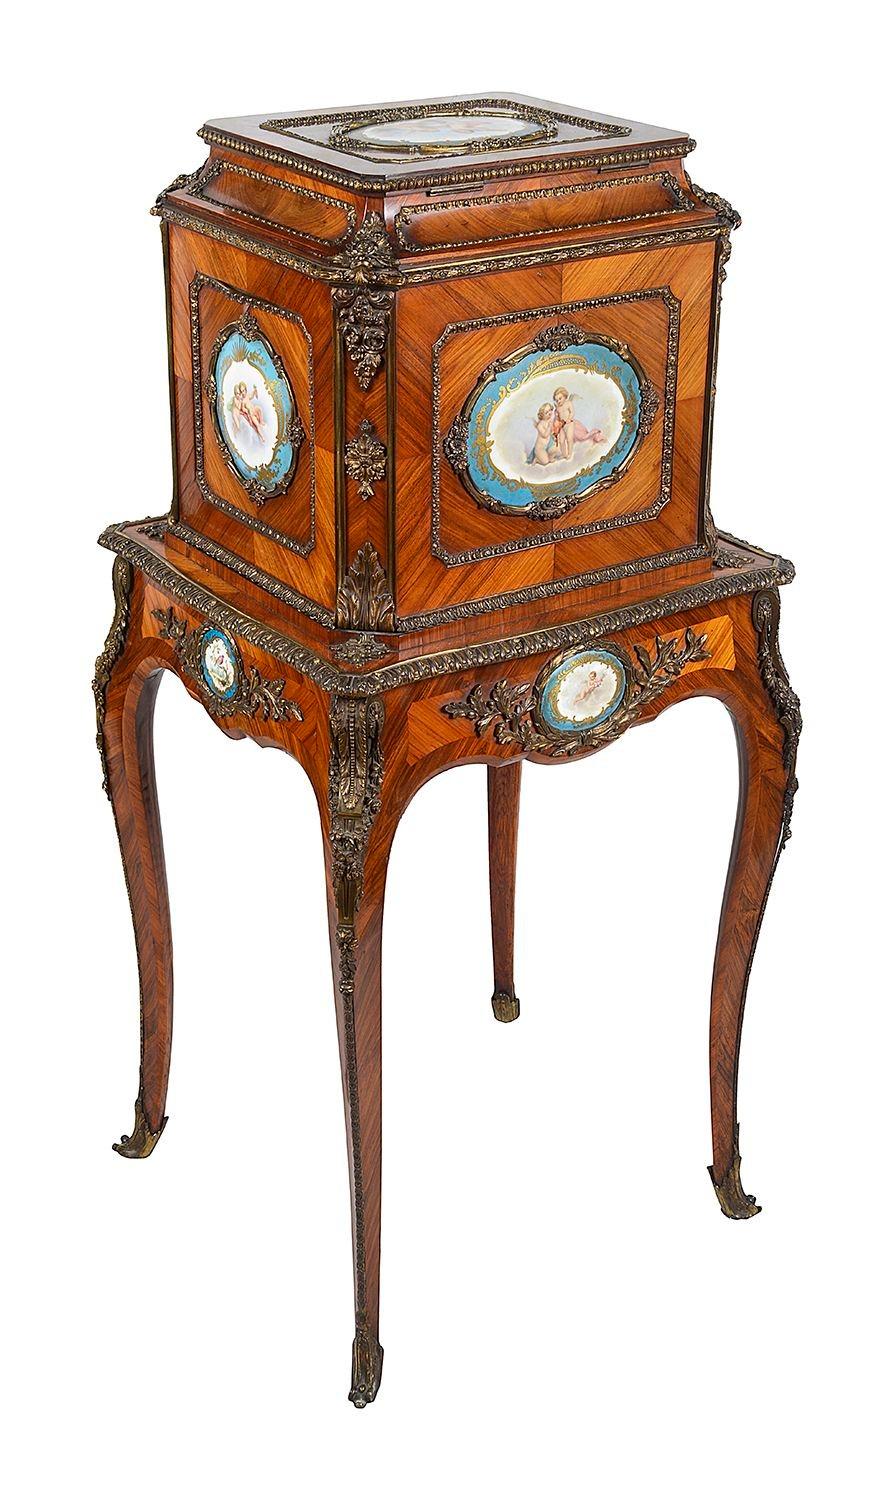 An early Victorian porcelain and ormolu mounted rosewood and tulipwood jewellery coffer on stand or coffre a bijoux attributed to Johann Martin Levien (1811-1871)
Circa 1845, an identical model forms part of the Royal Collection
The quarter veneered